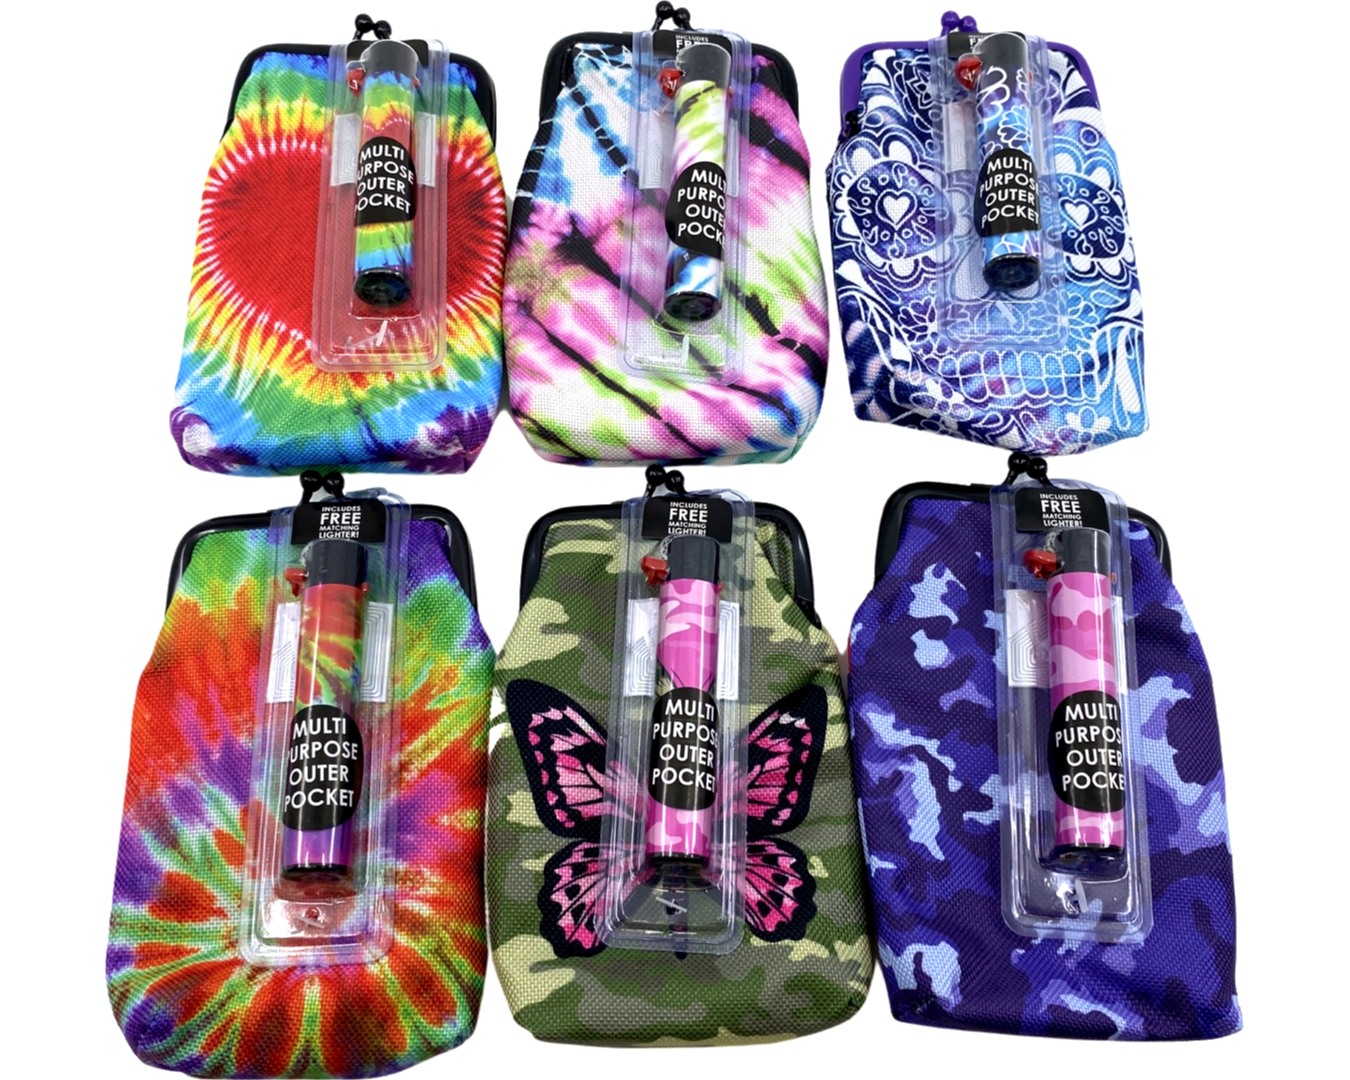 ITEM NUMBER 040313 PRINT CIG POUCH LIGHTER D 6 PIECES PER DISPLAY